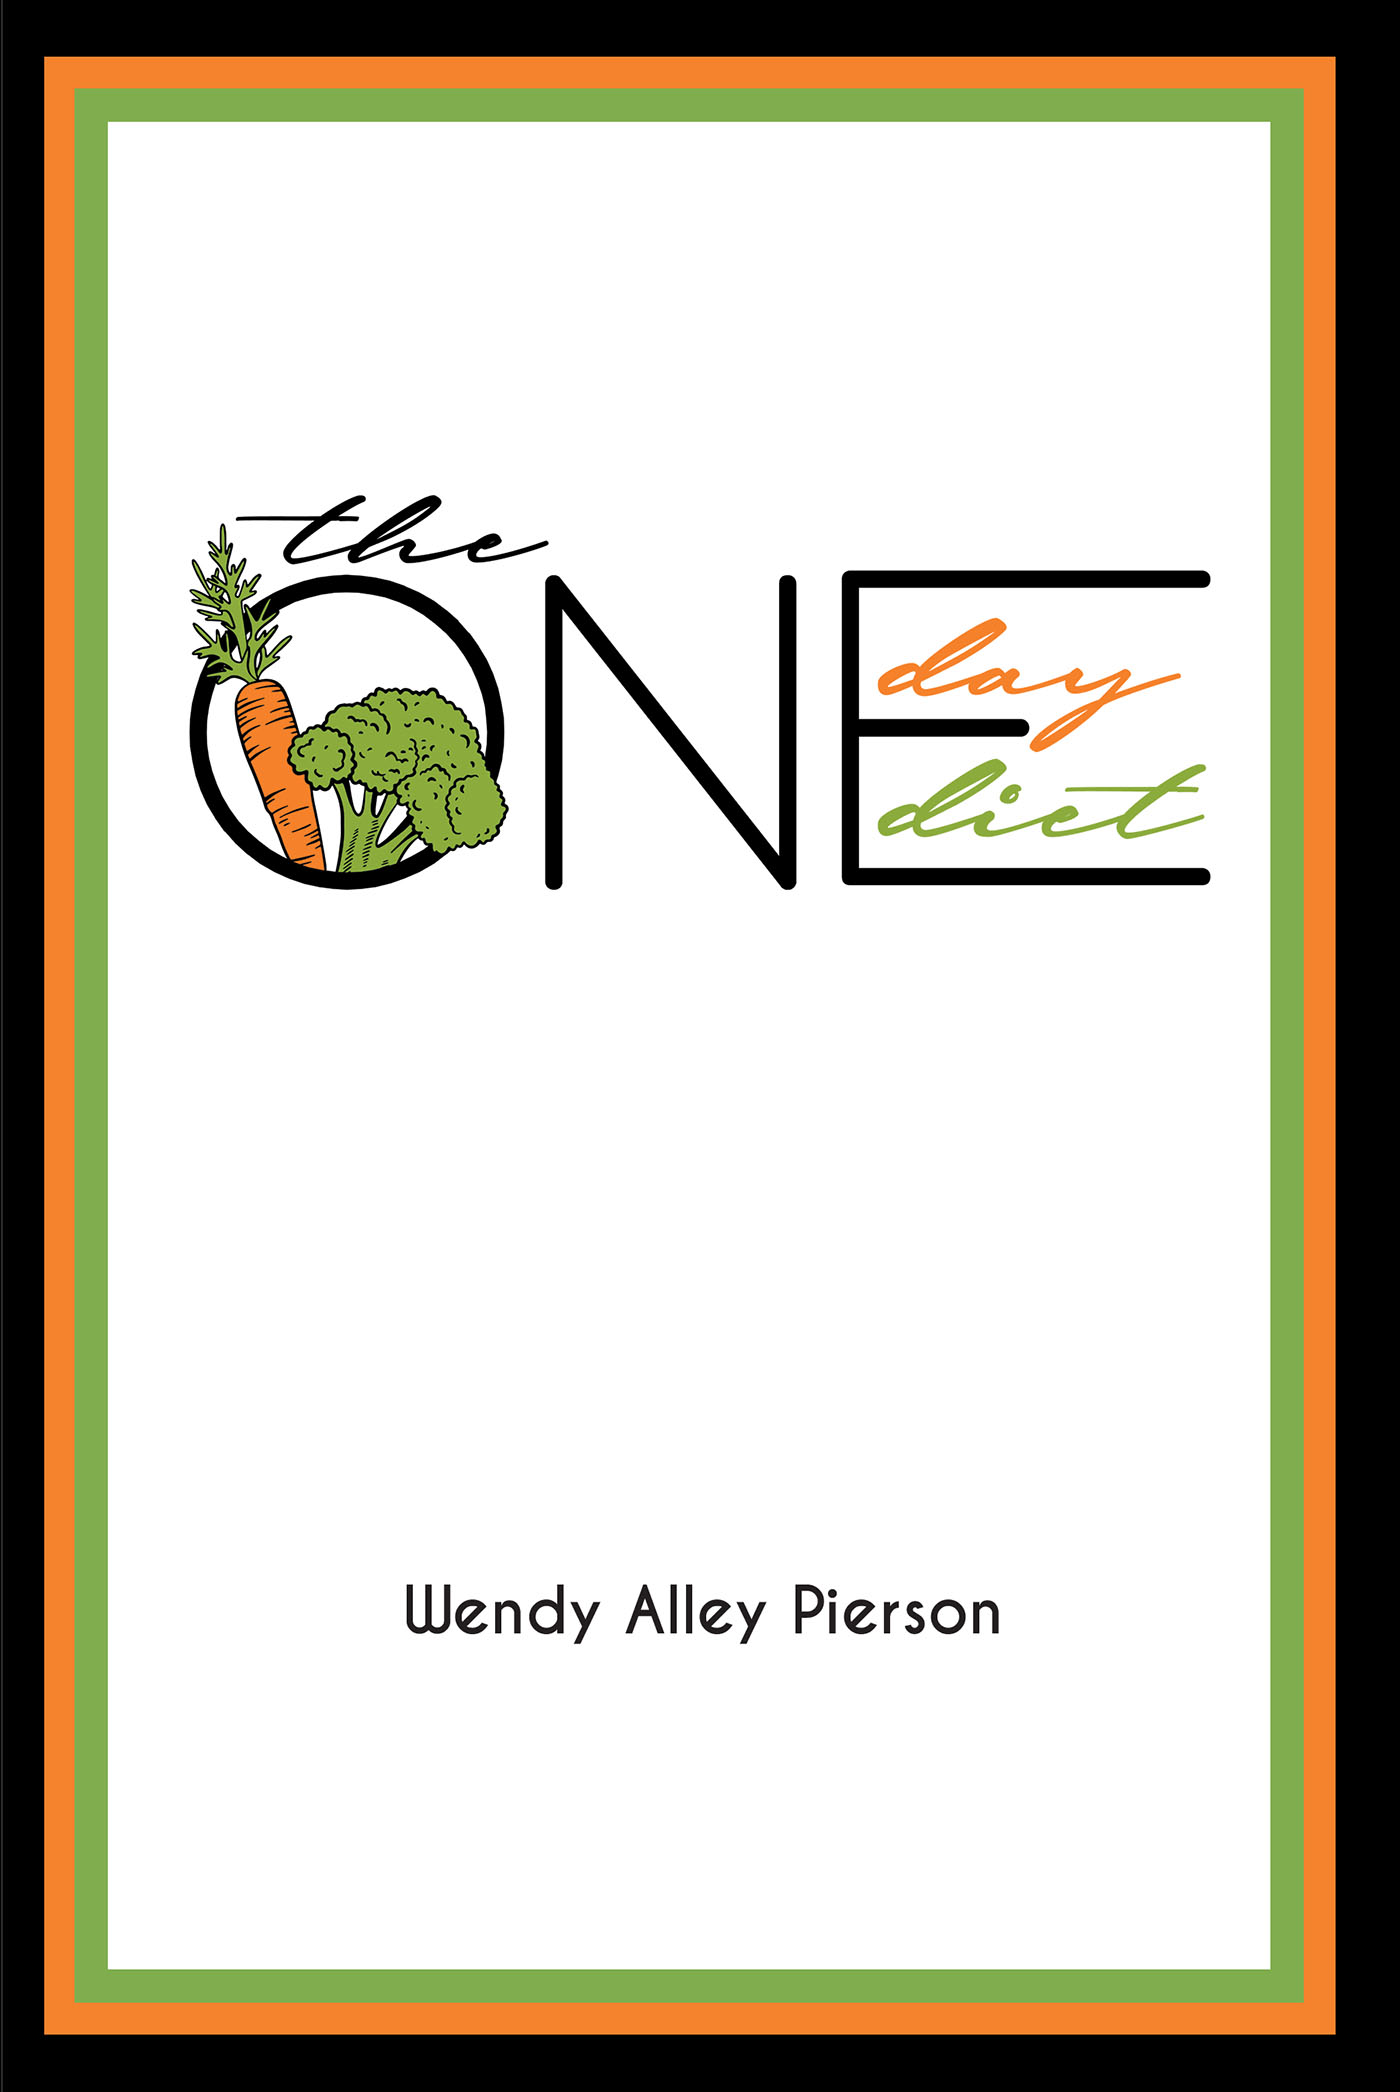 Author Wendy Alley Pierson’s New Book, "The One Day Diet," is a Helpful Tool That Proposes a New, Sustainable Method and Way of Thinking About Weight Loss